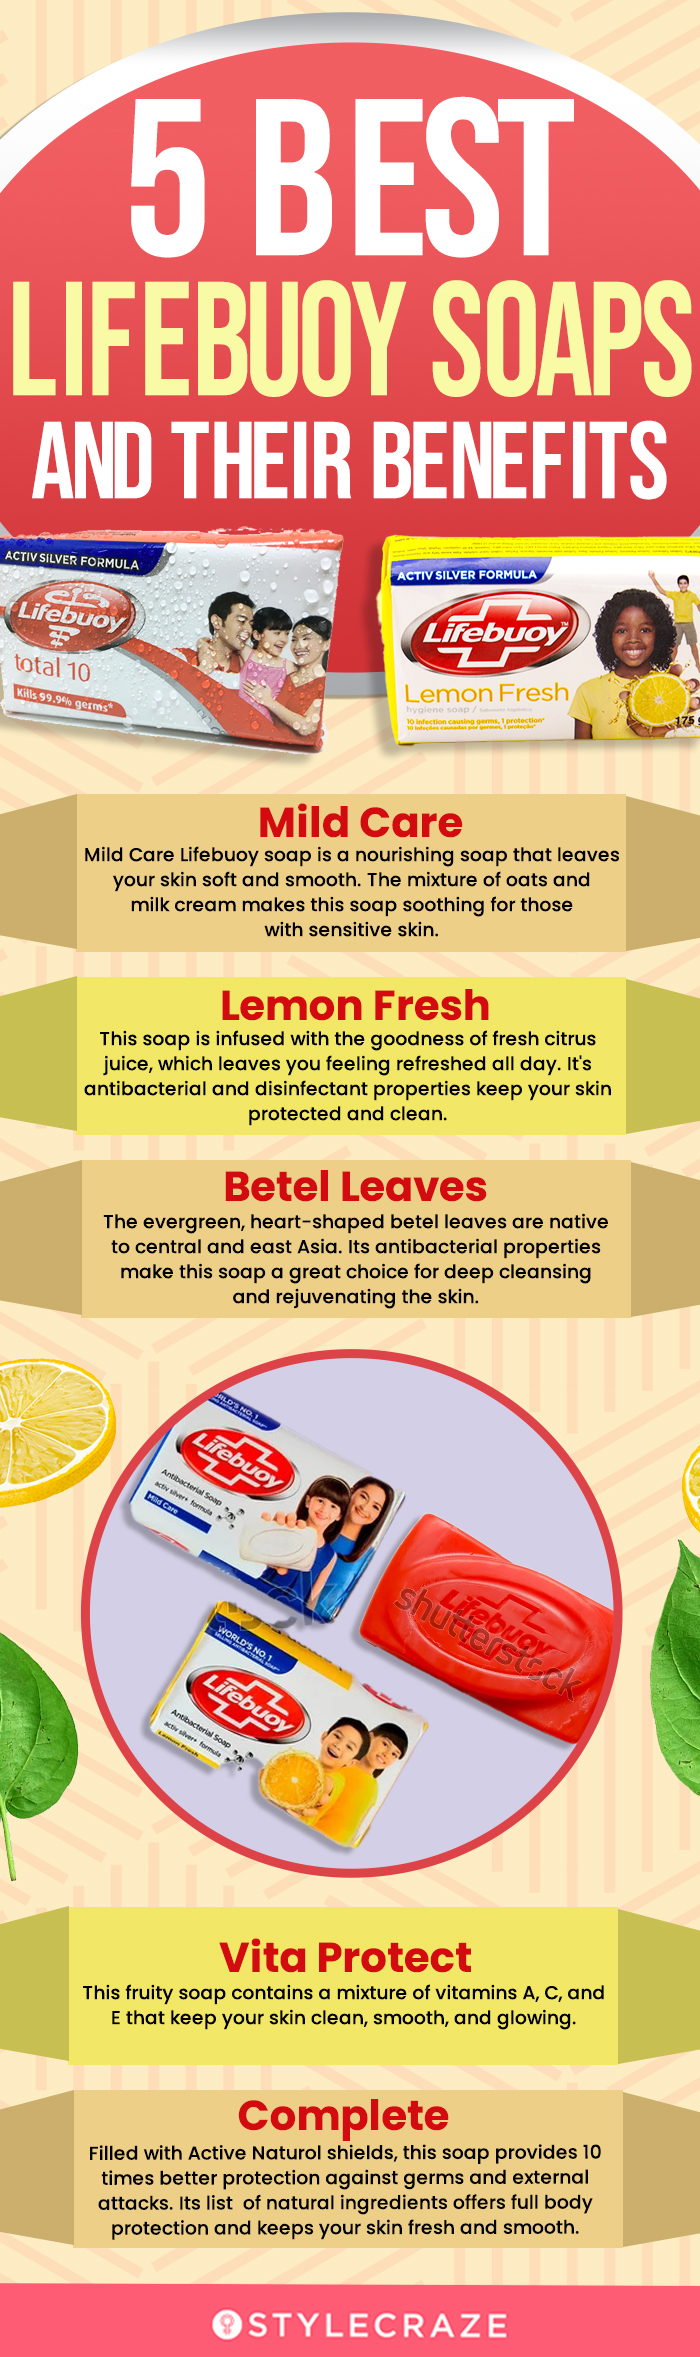 5 best lifebuoy soaps and their benefits (infographic)